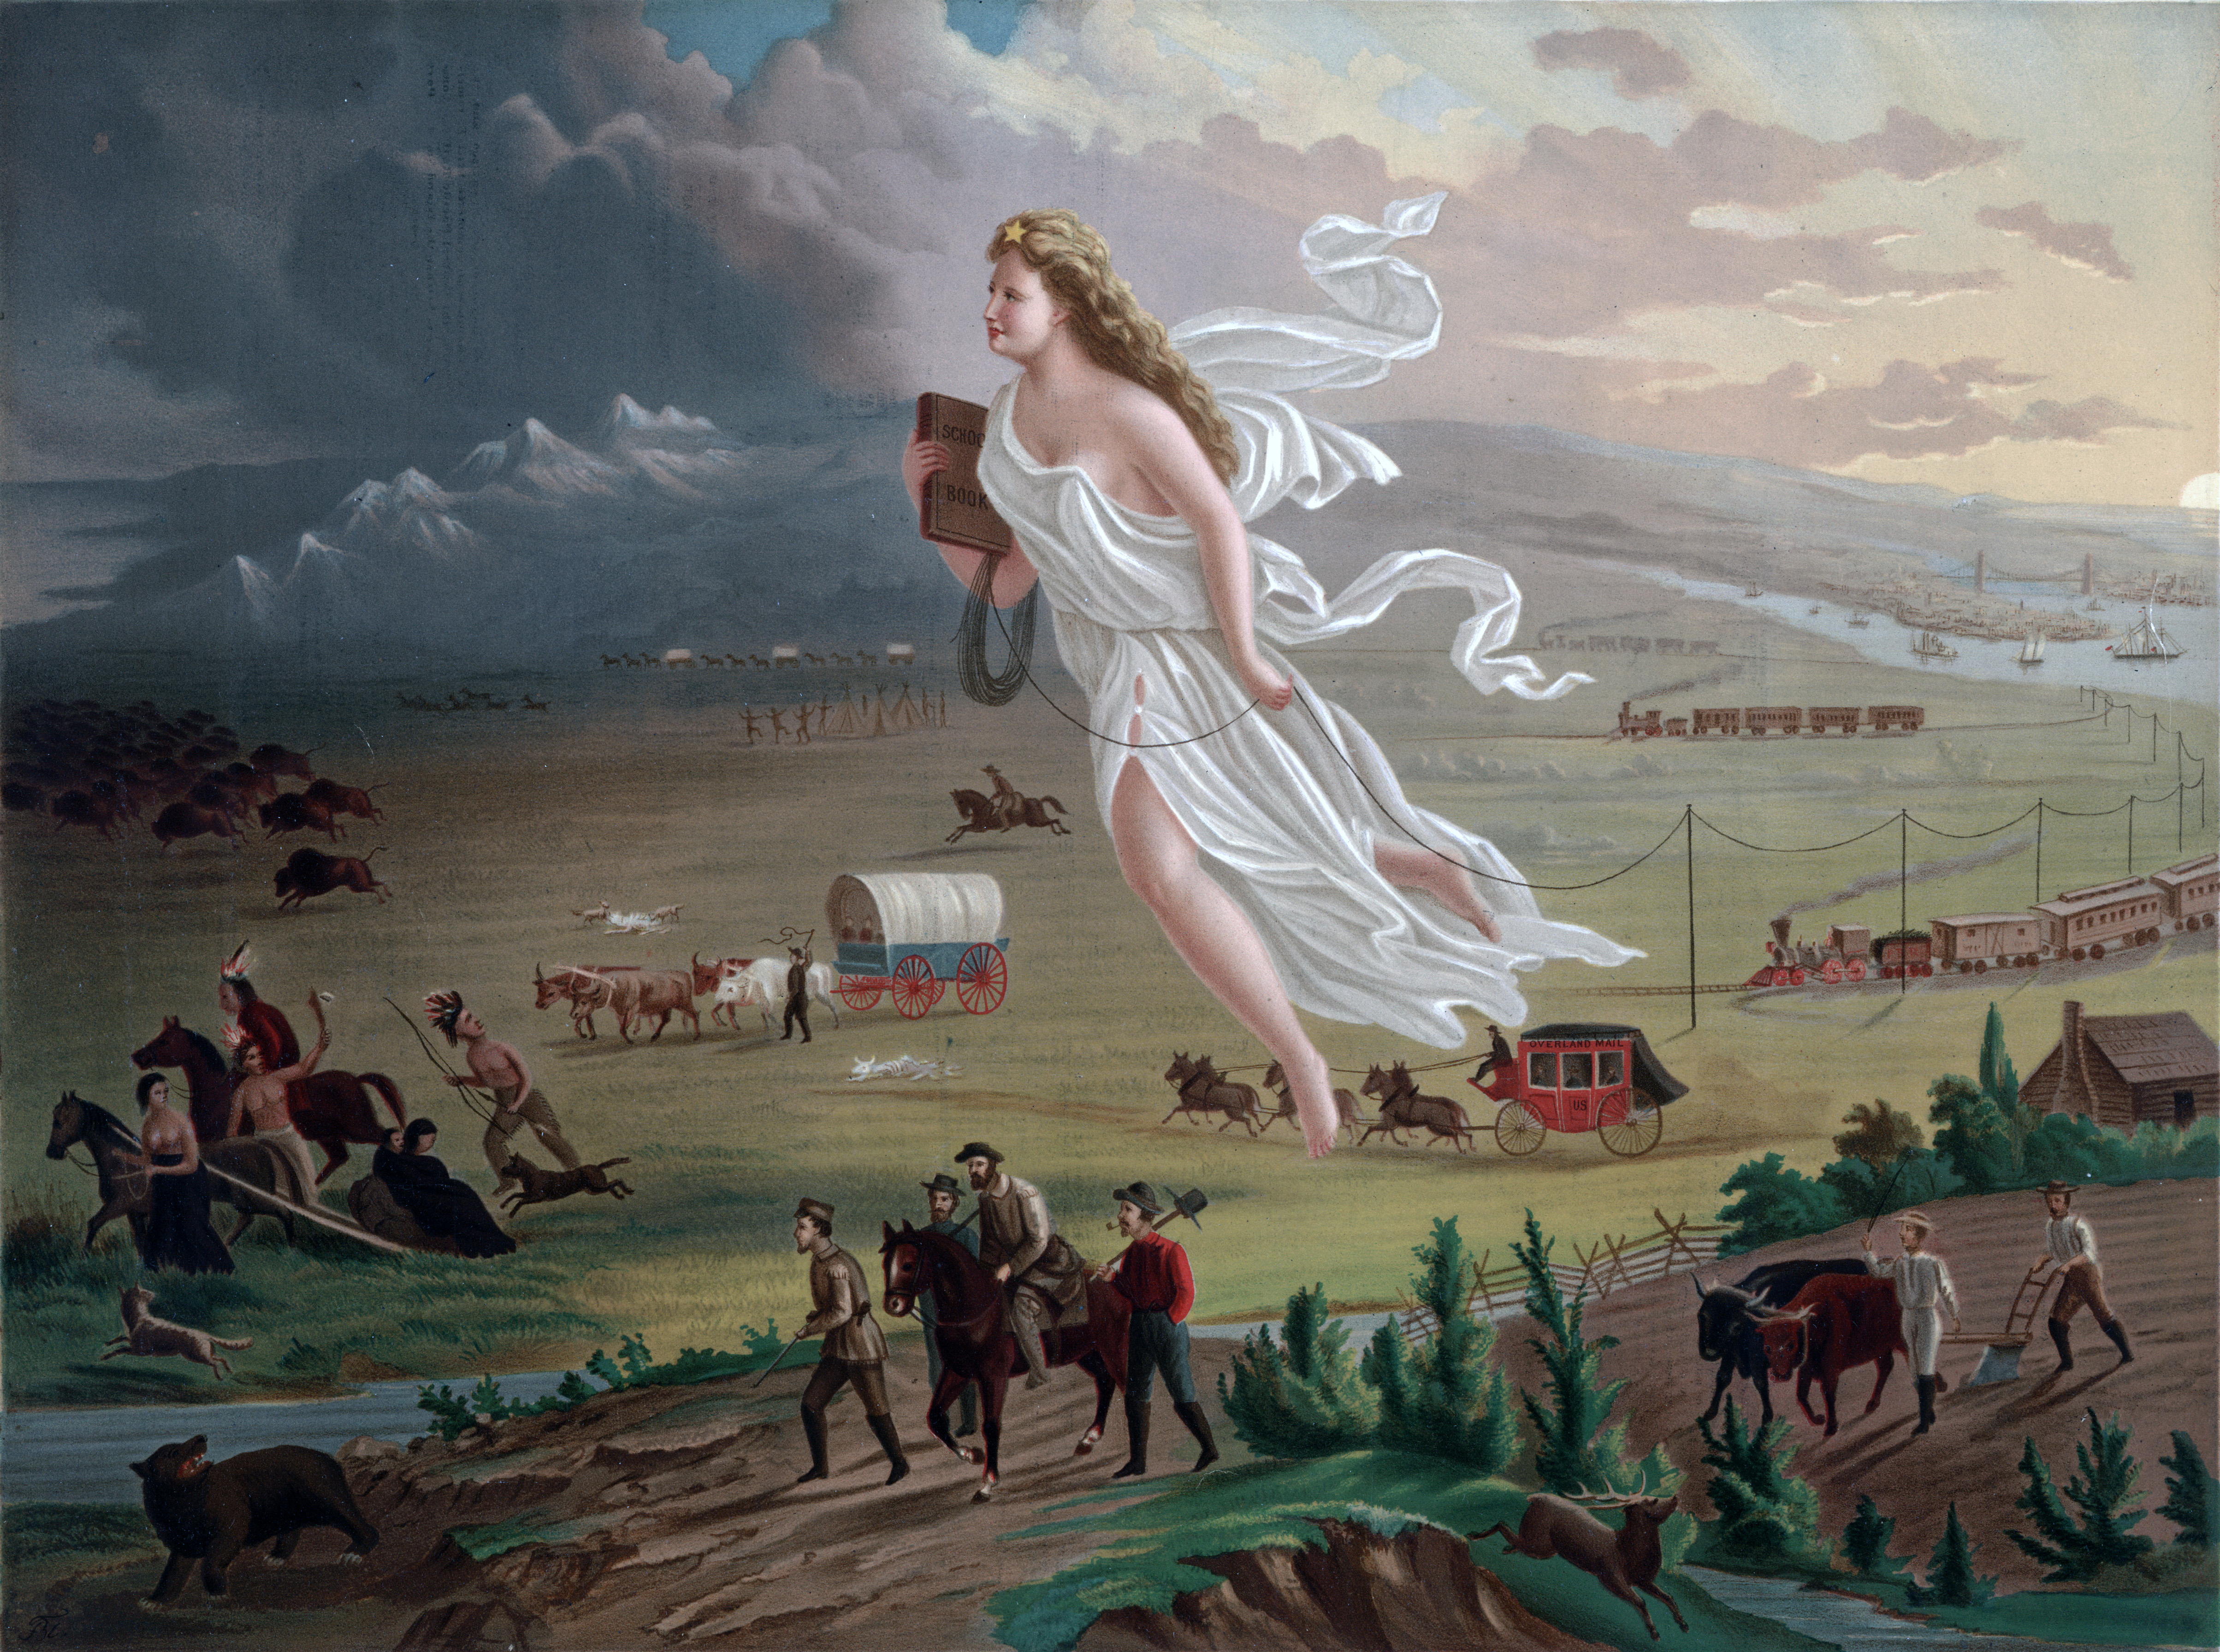 A painting of a woman floating in the air headed westward, paving the way for western civilization